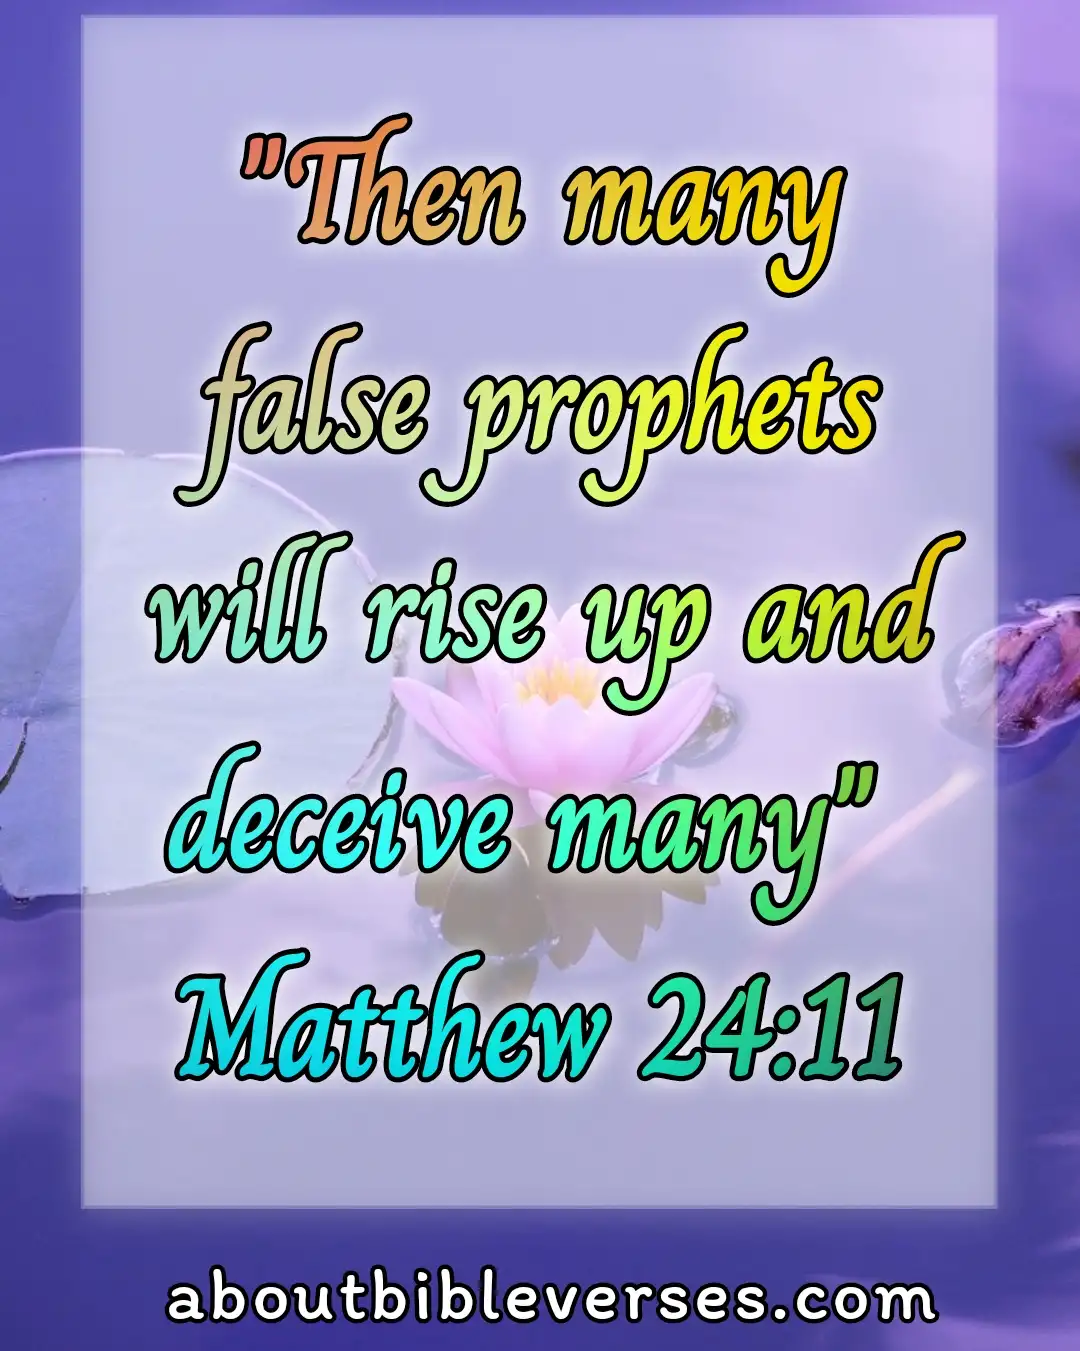 bible verse about deception in the last days (Matthew 24:11)